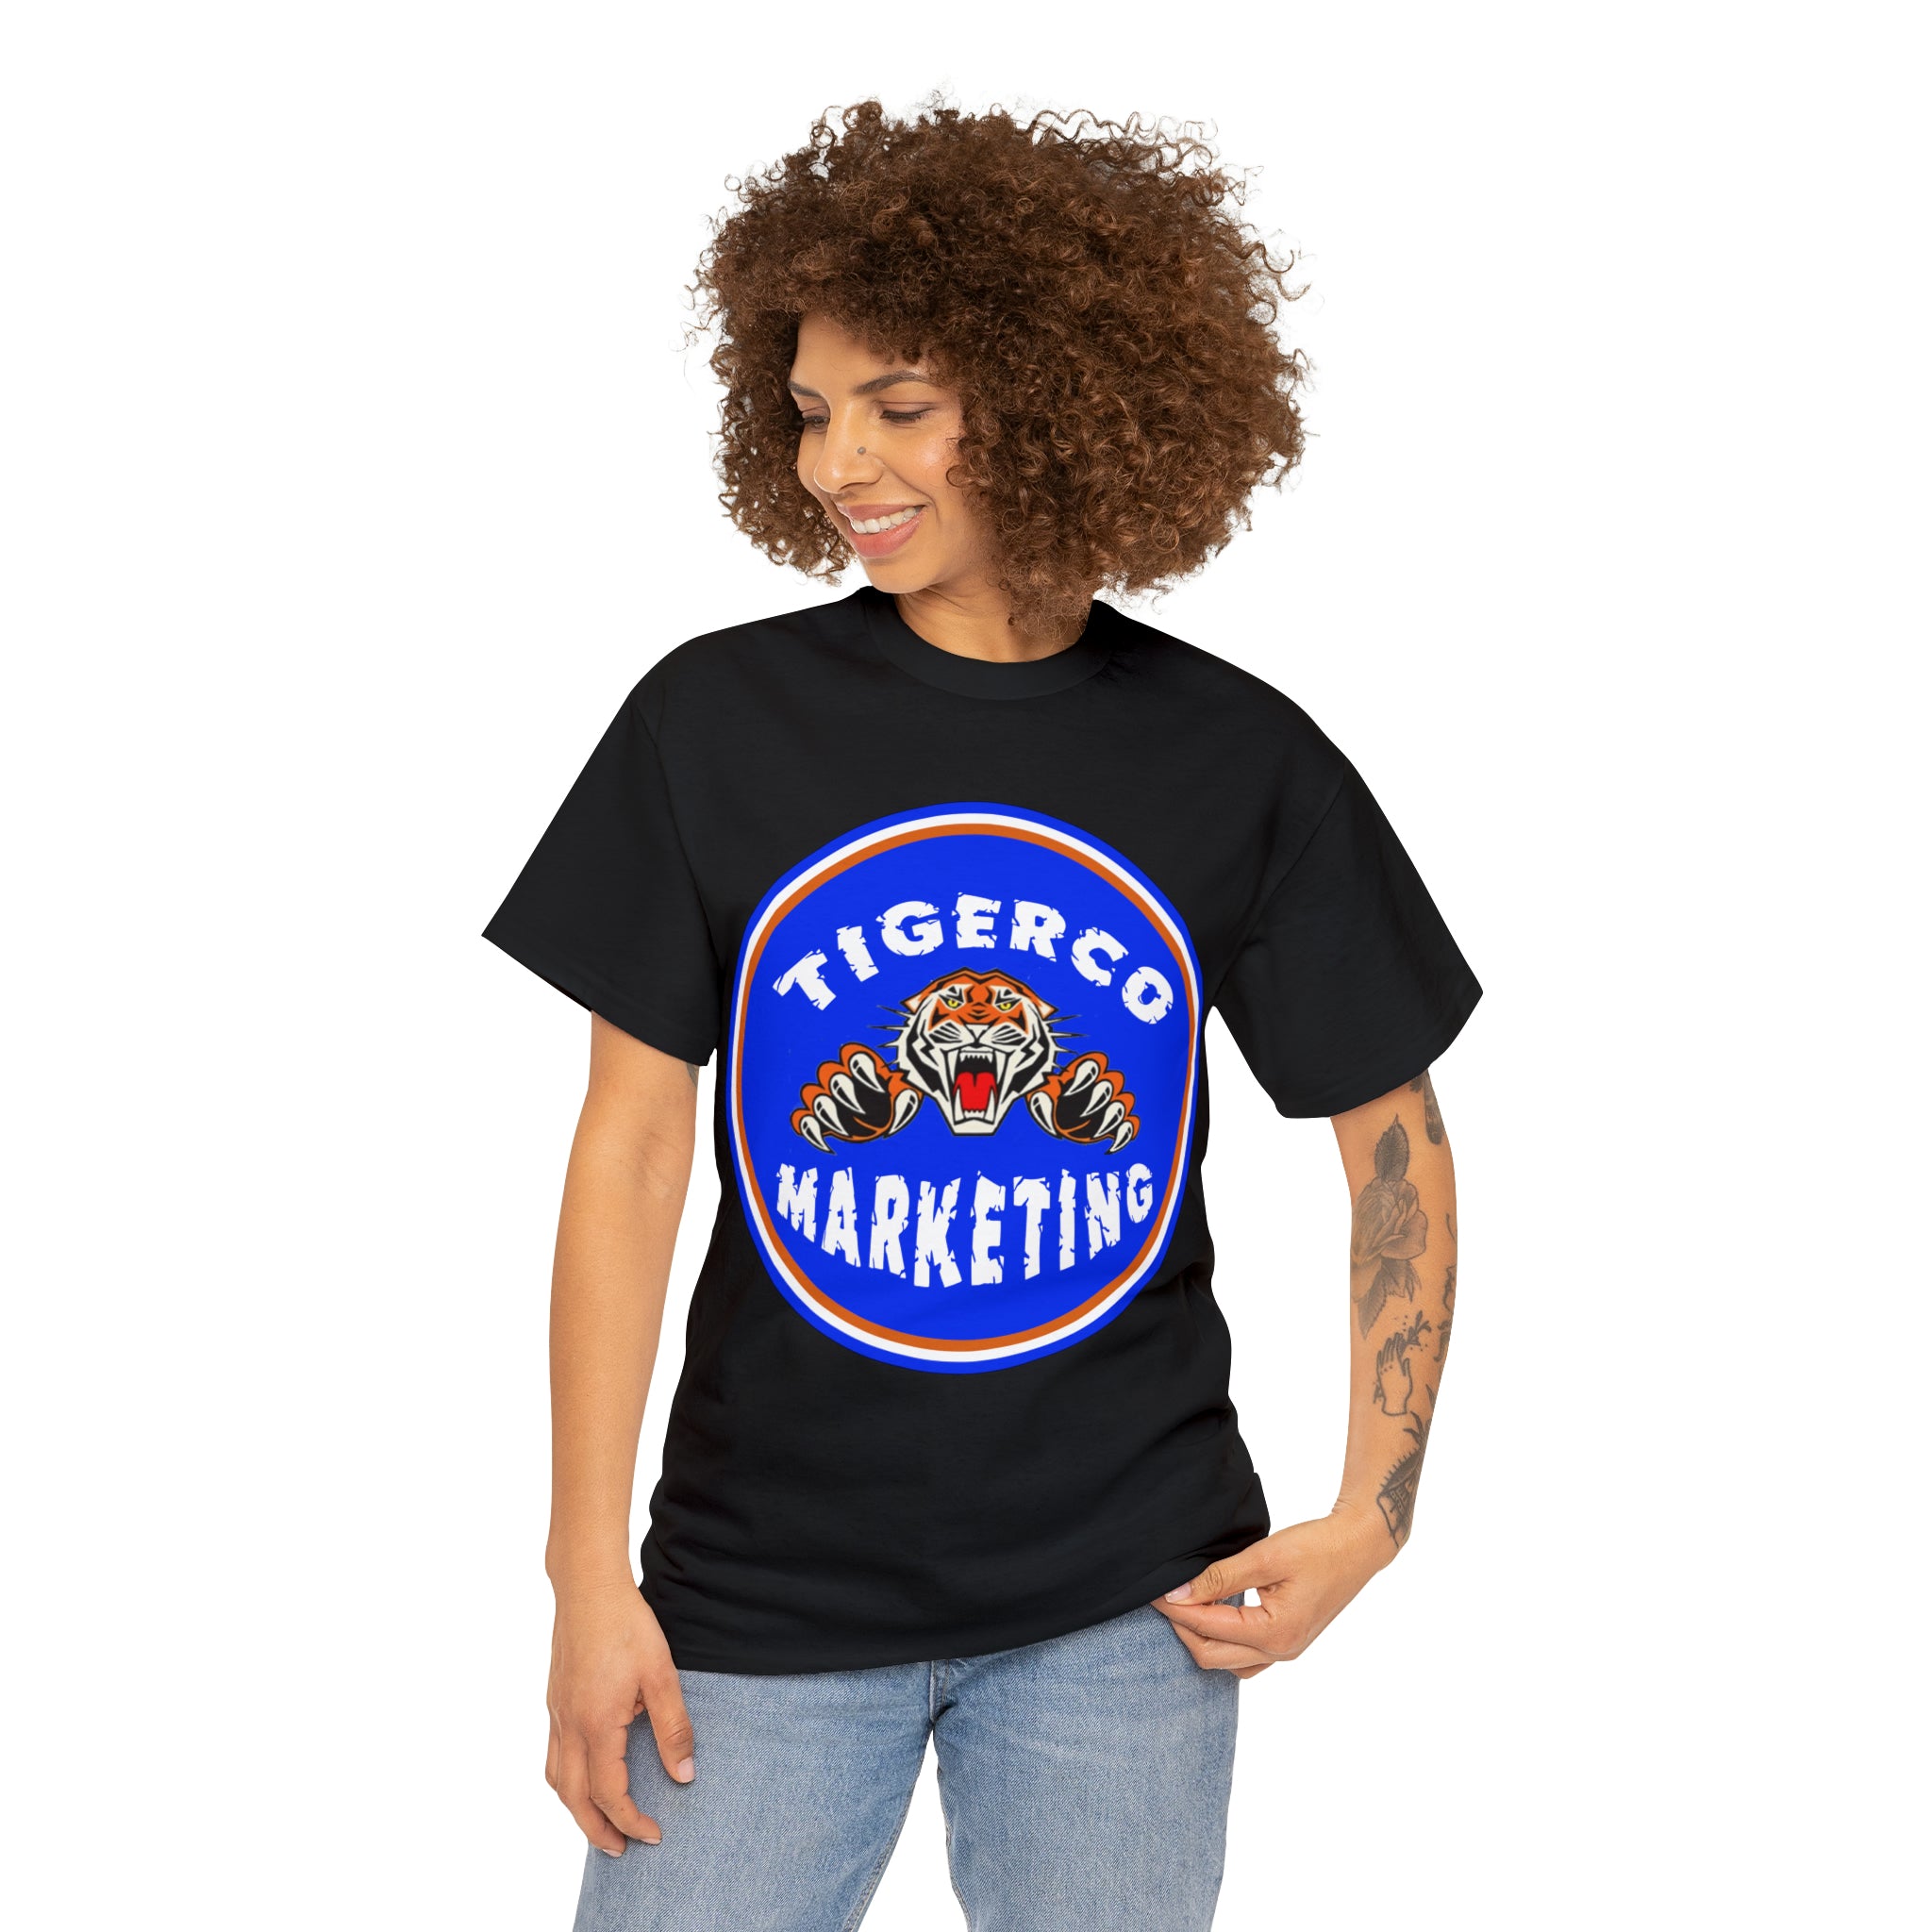 TigerCo Marketing Official Unisex Heavy Cotton Tee